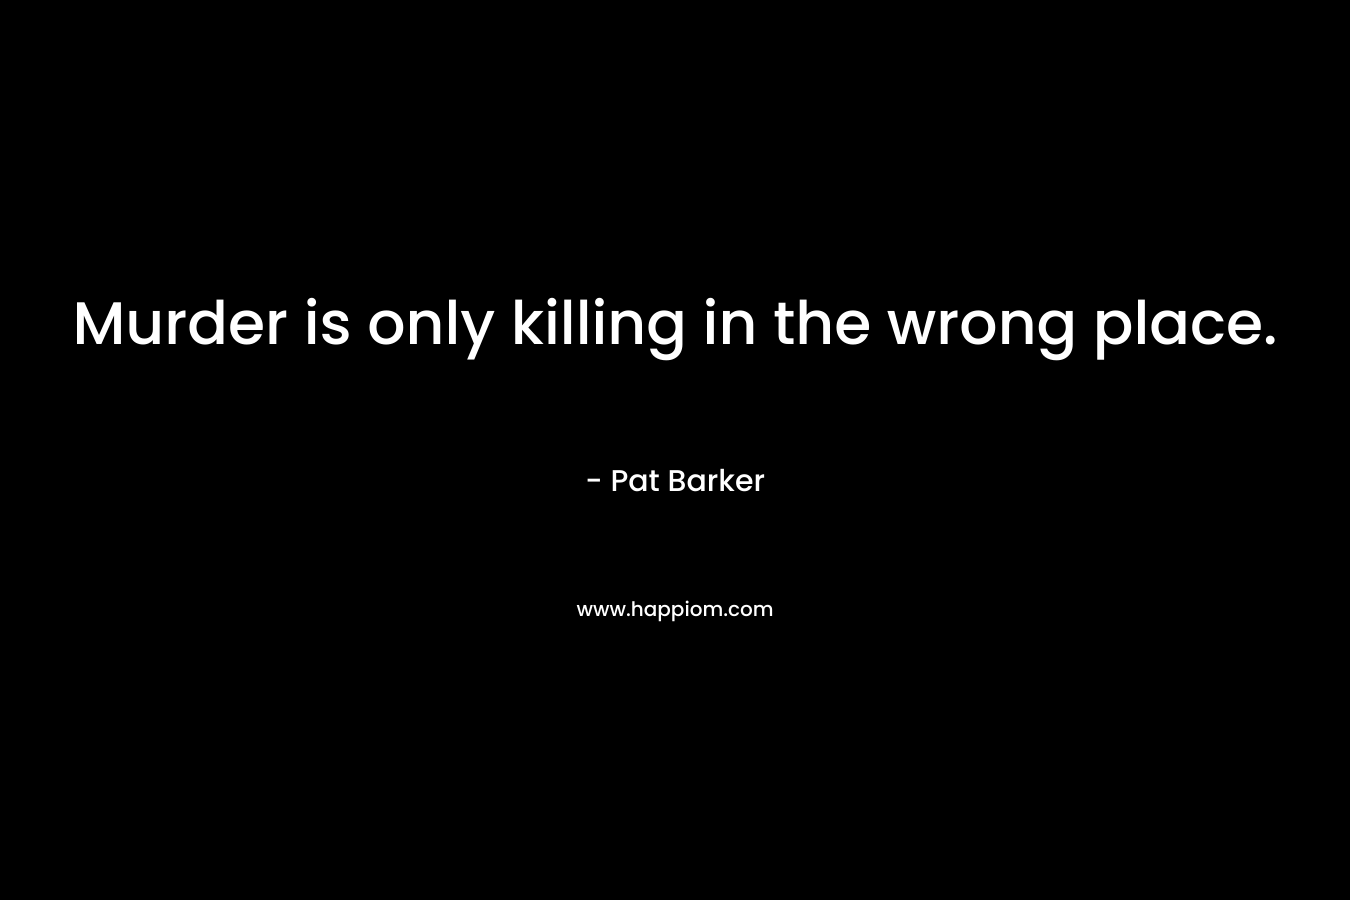 Murder is only killing in the wrong place. – Pat Barker